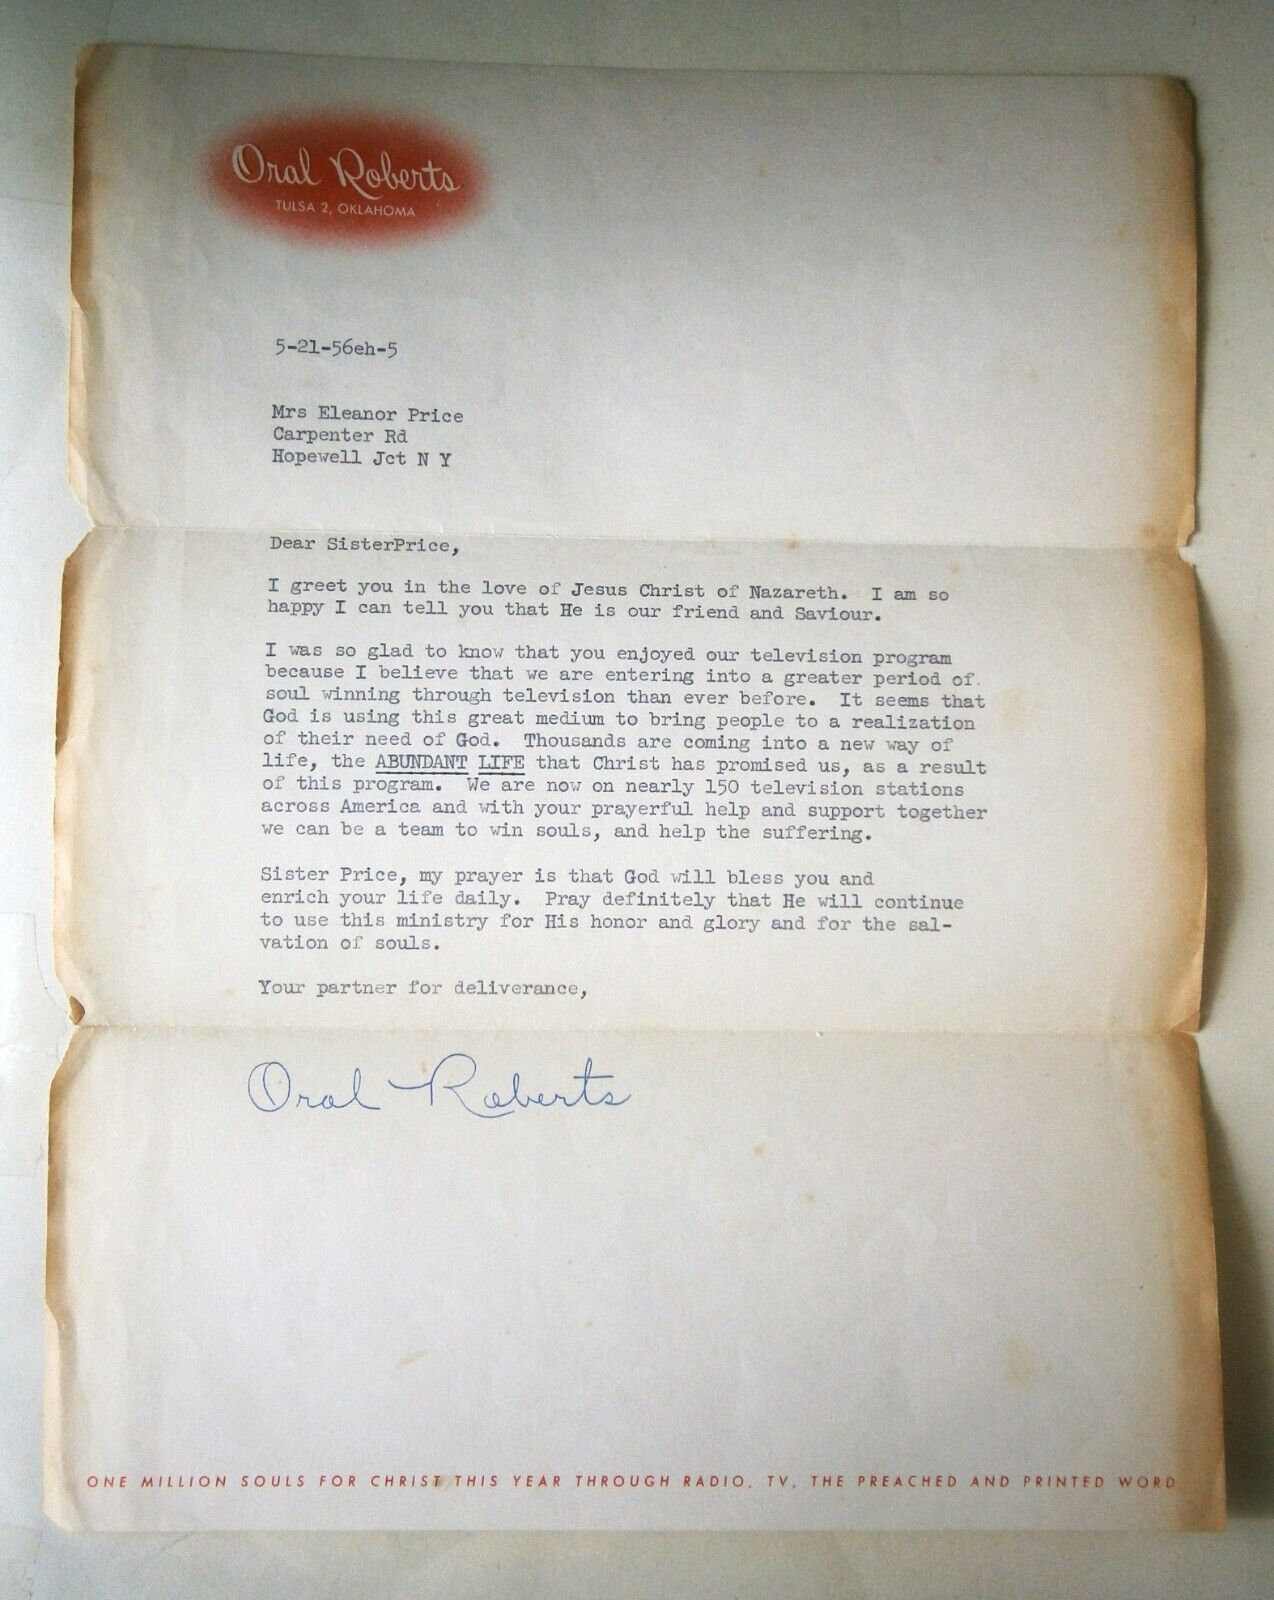 Oral Roberts Signed Letter dated May 1956